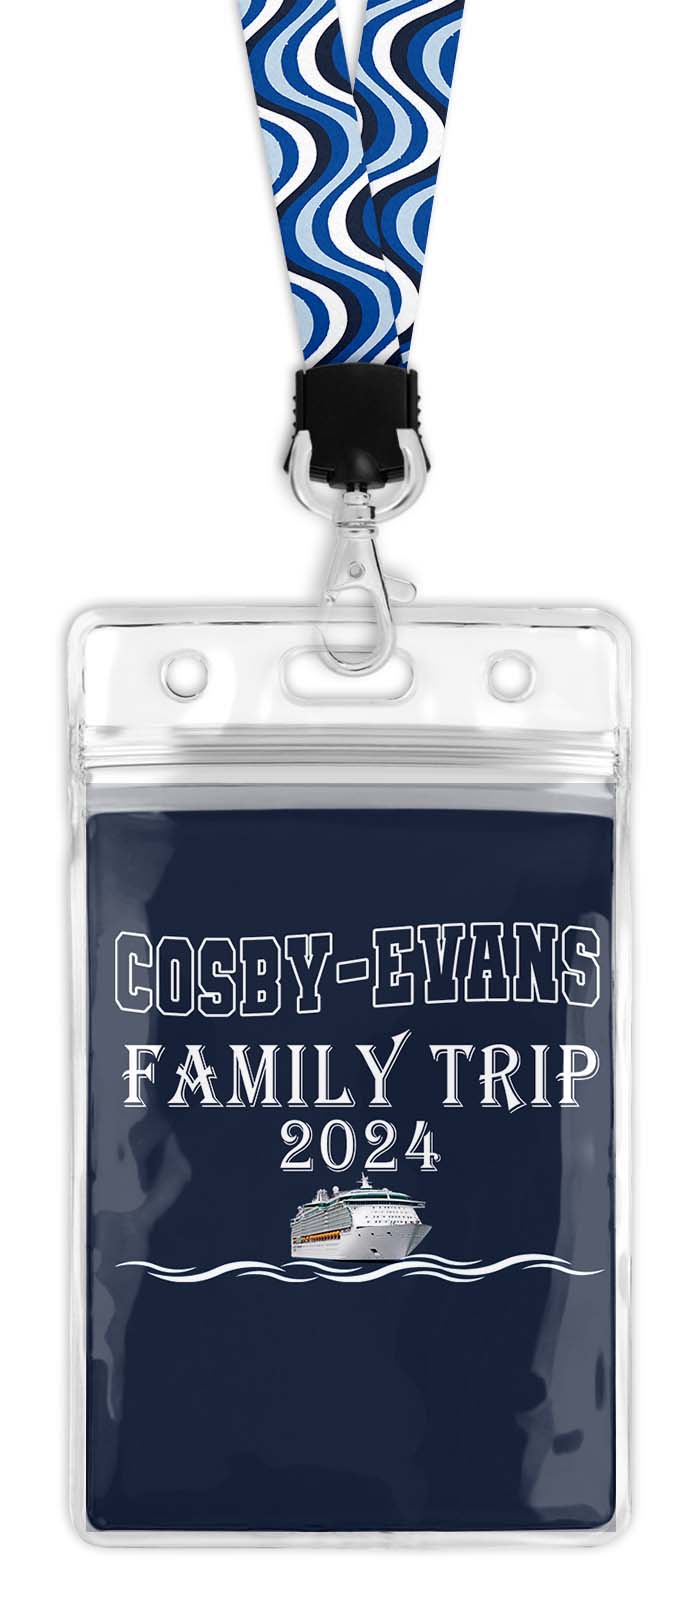 Cosby-Evans Reunion Cruise 2024 Merch Package - Tank Top & Lanyard